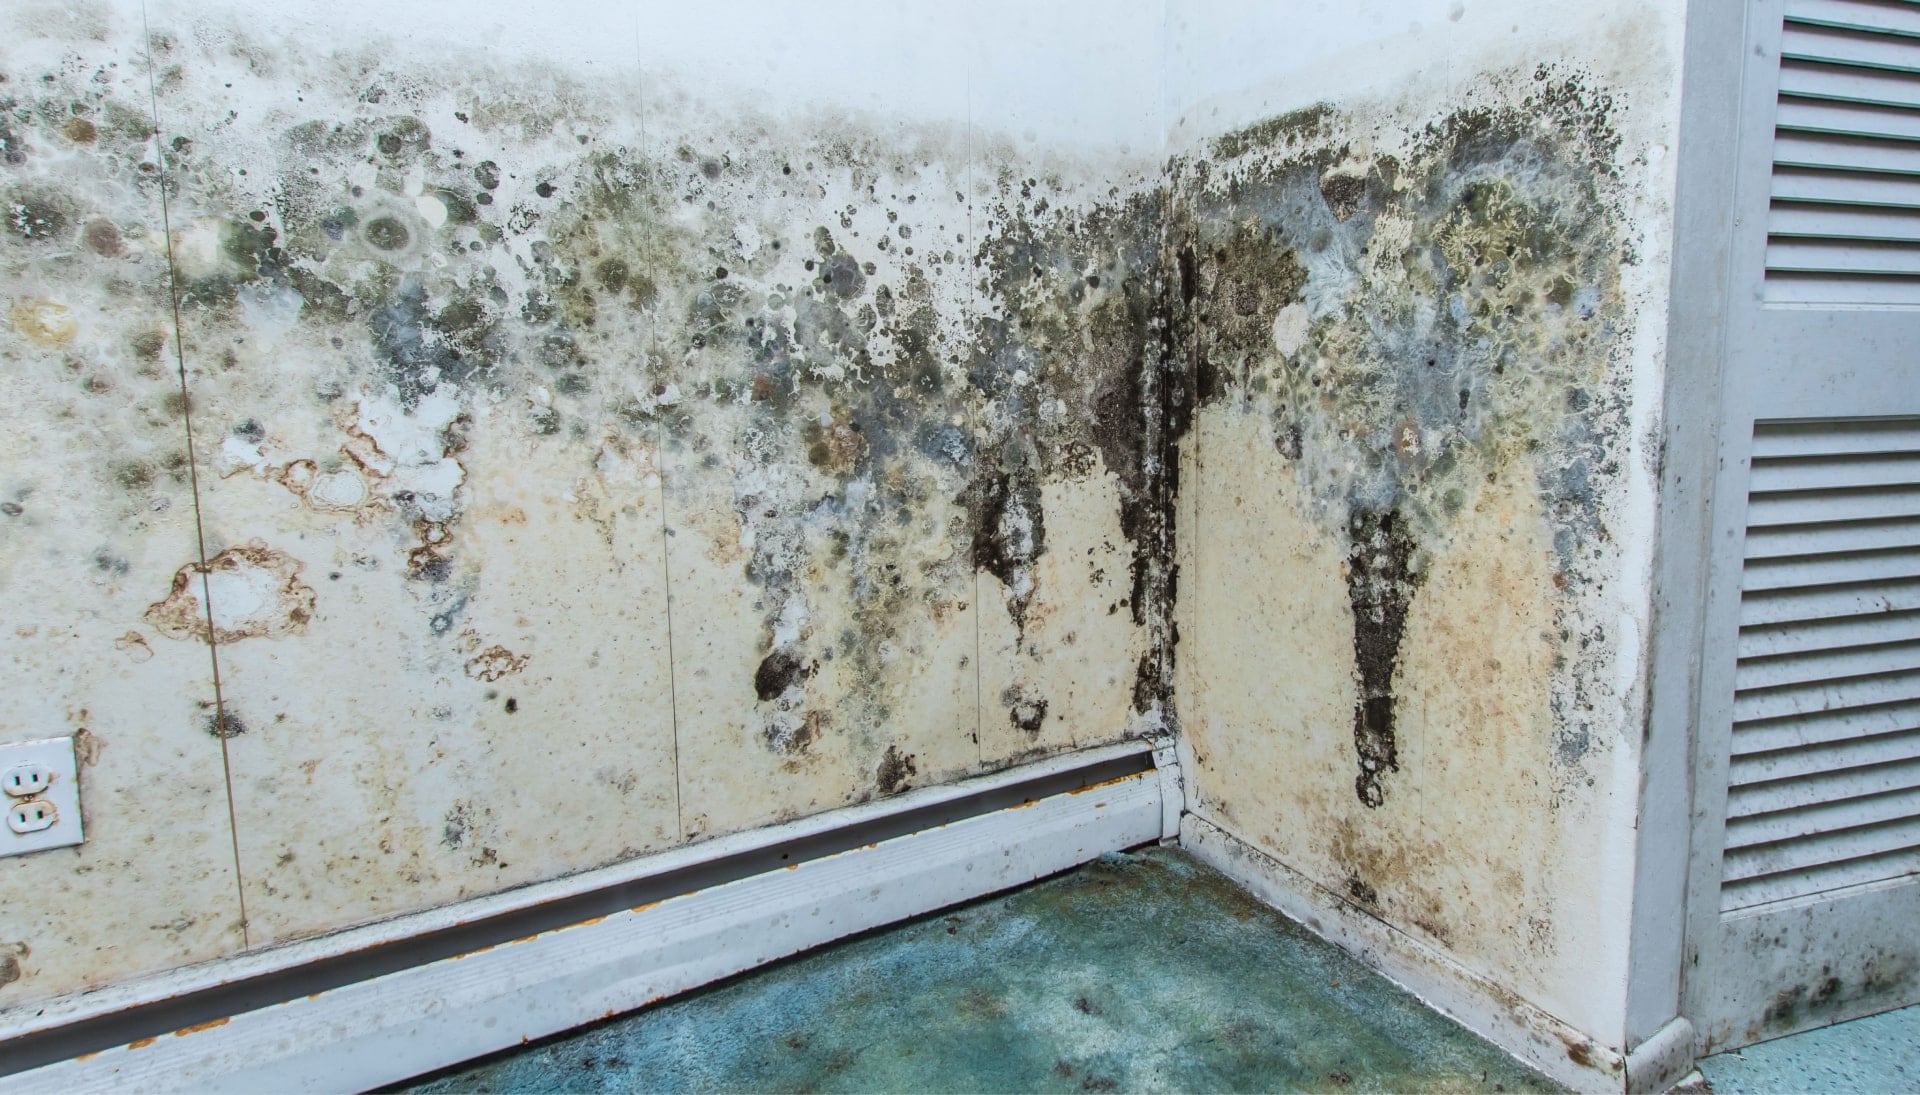 Professional mold removal, odor control, and water damage restoration service in Speedway, Indiana.